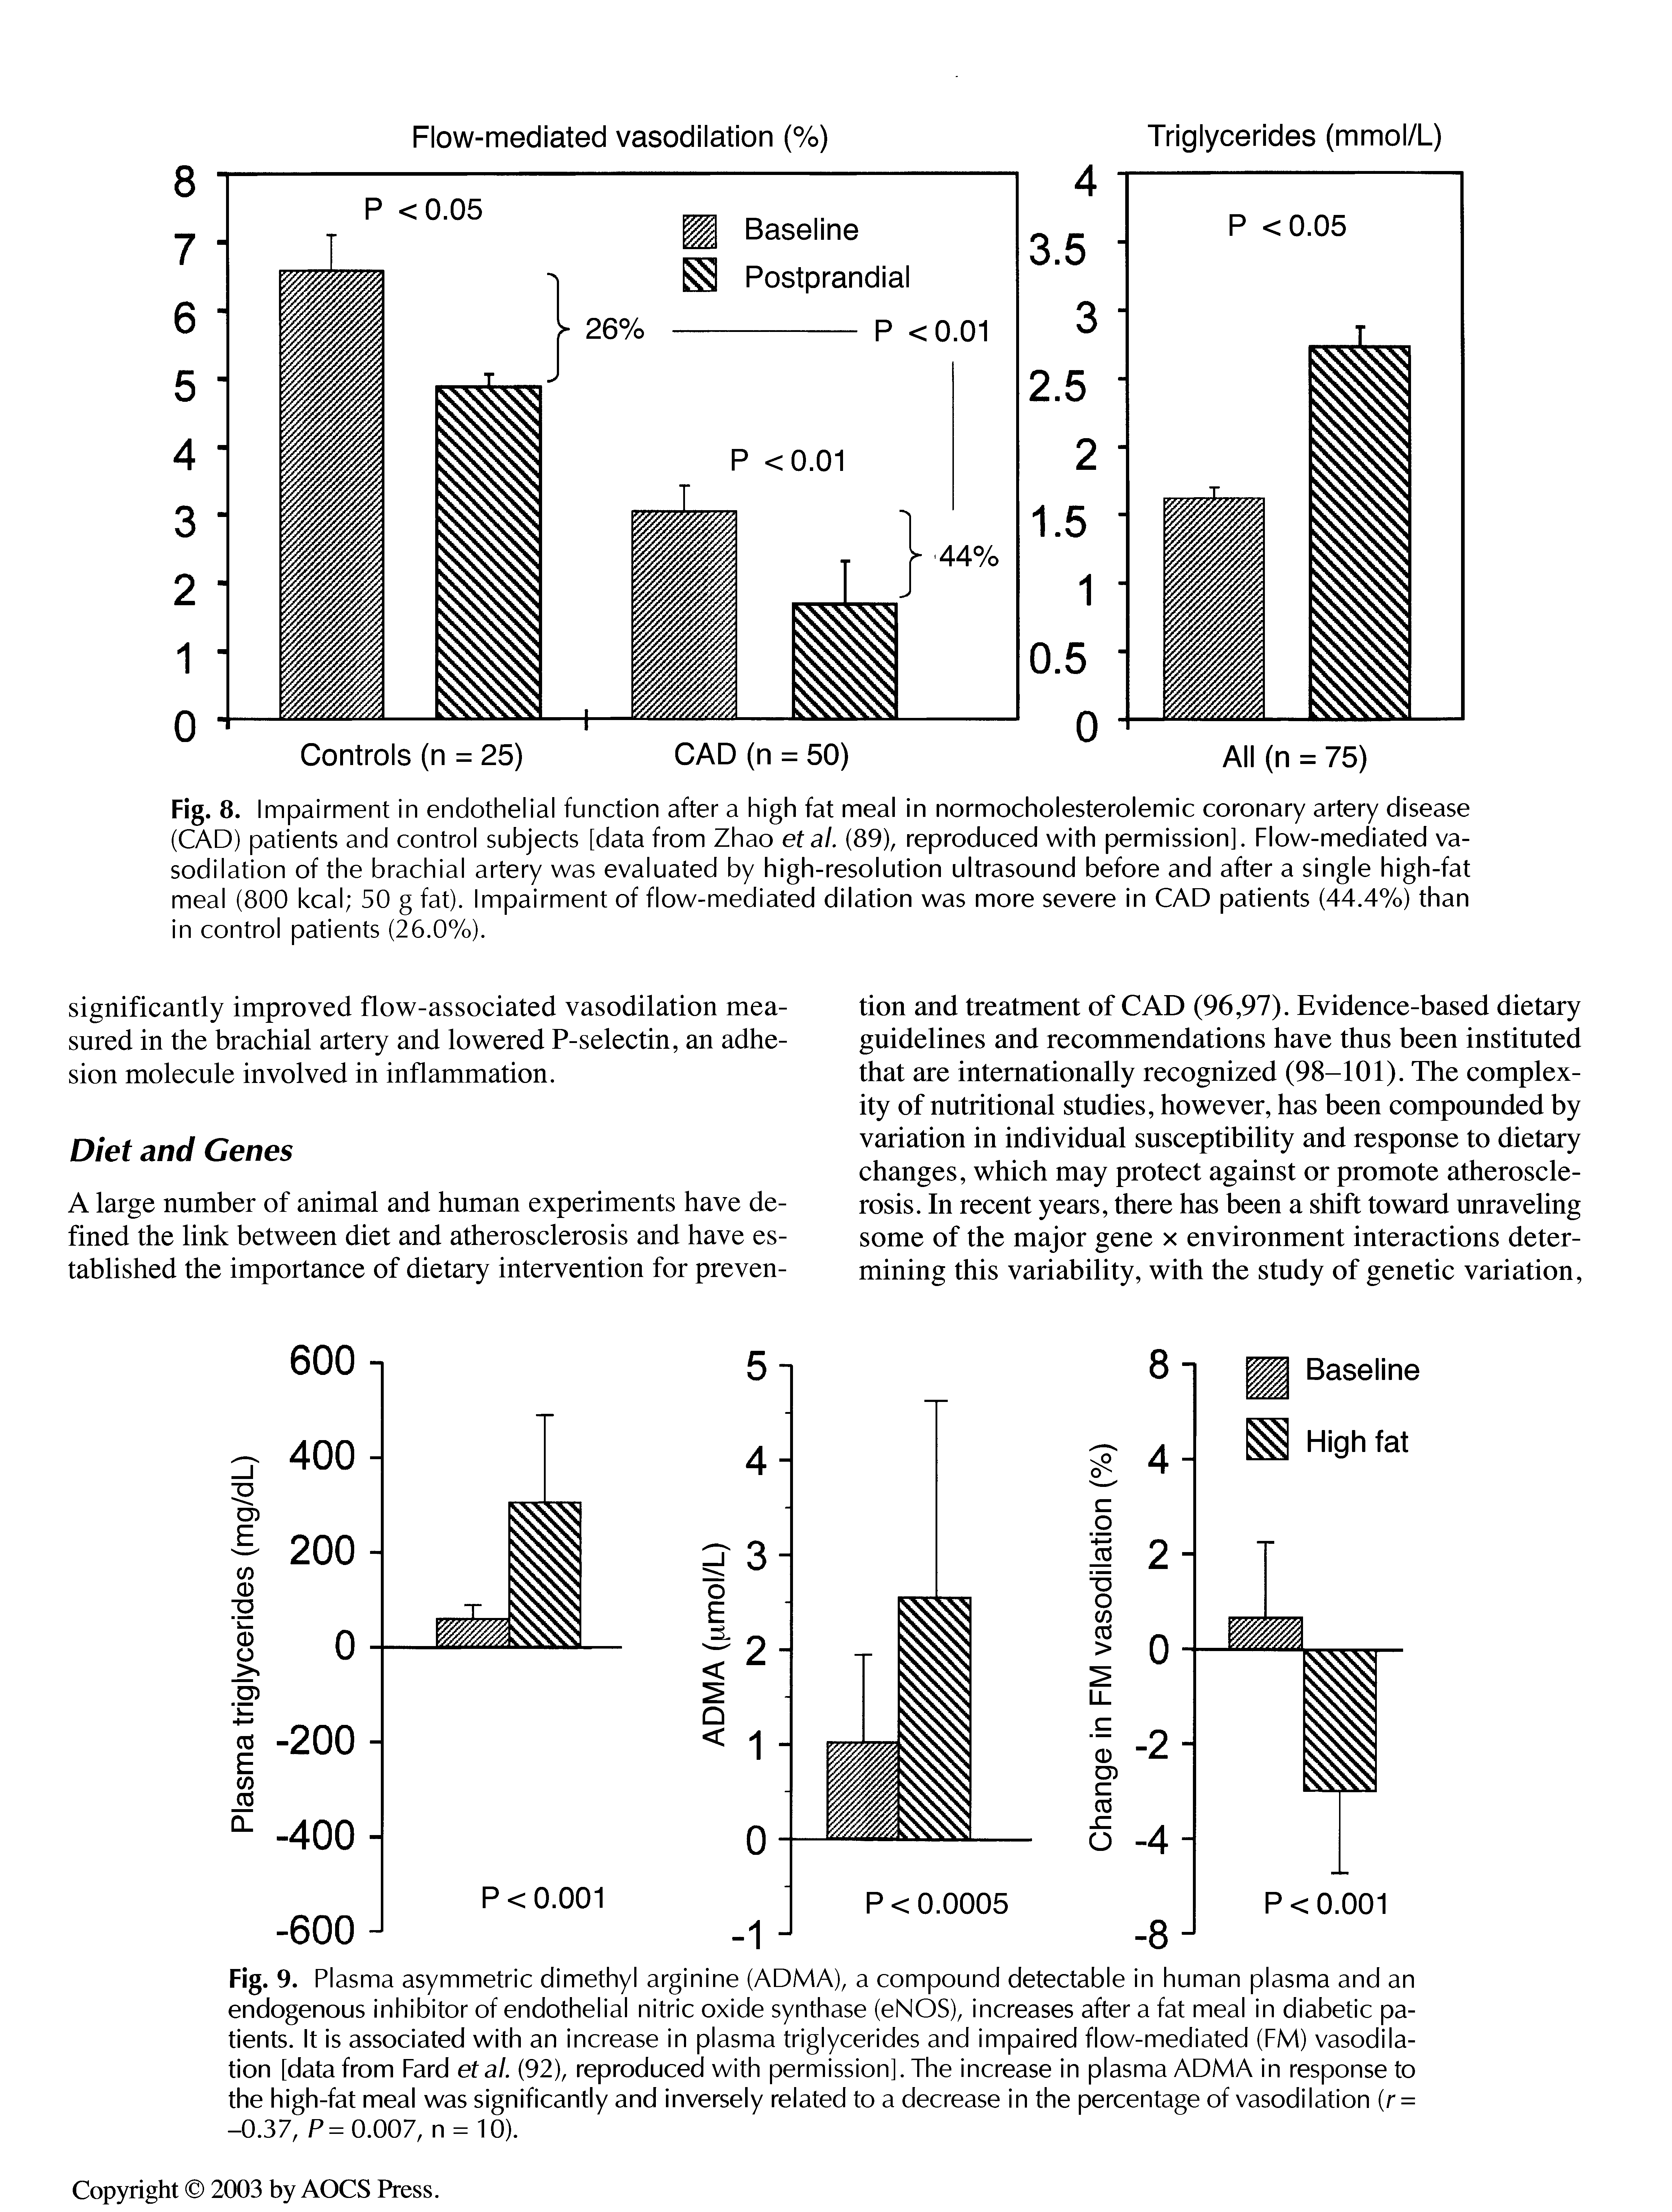 Fig. 8. Impairment in endothelial function after a high fat meal in normocholesterolemic coronary artery disease (CAD) patients and control subjects [data from Zhao etal. (89), reproduced with permission]. Flow-mediated vasodilation of the brachial artery was evaluated by high-resolution ultrasound before and after a single high-fat meal (800 kcal 50 g fat). Impairment of flow-mediated dilation was more severe in CAD patients (44.4%) than in control patients (26.0%).